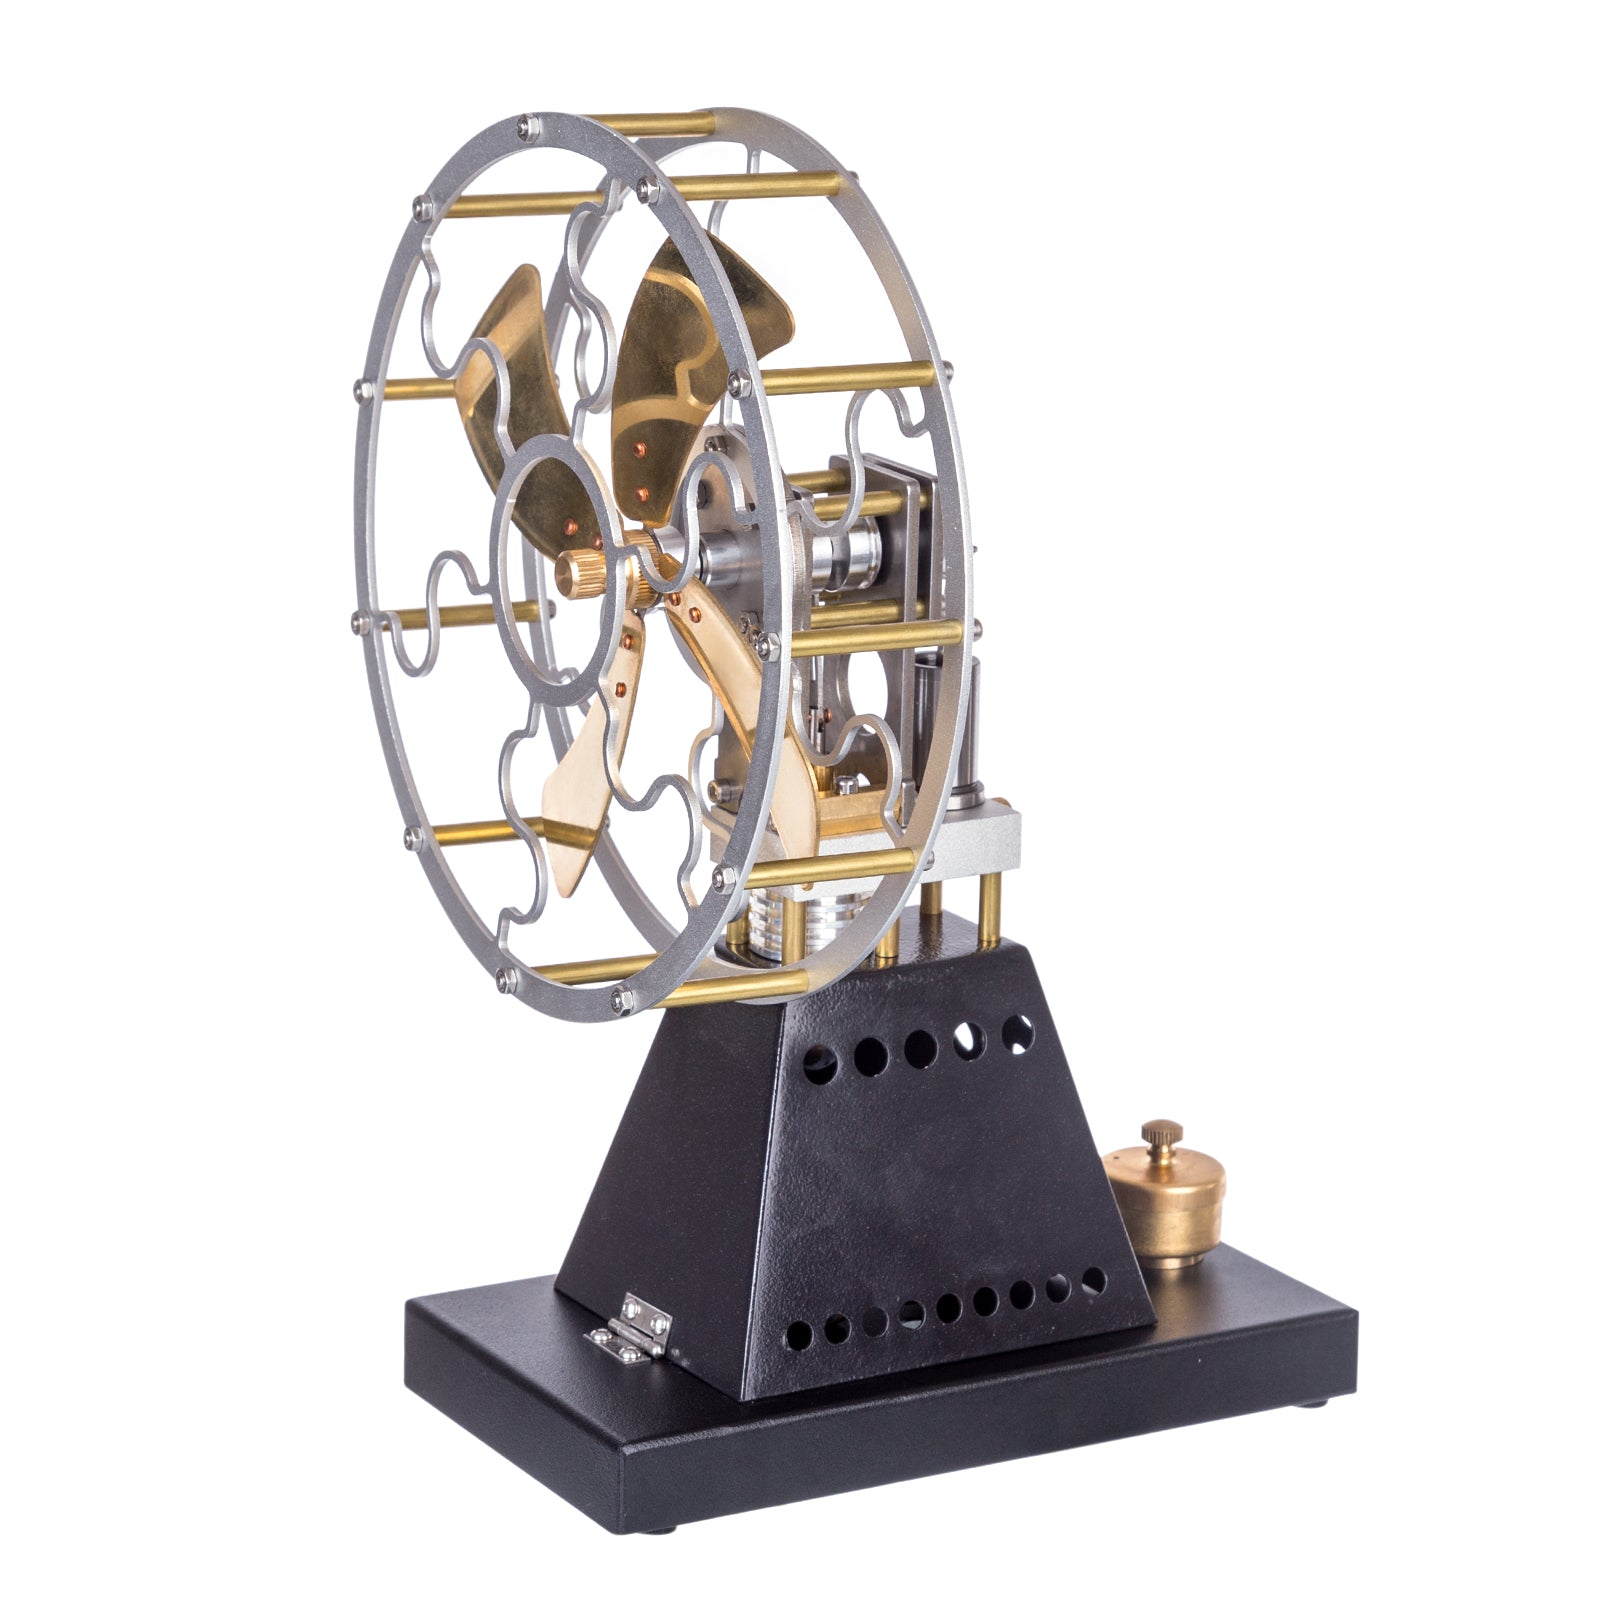 How to Make Thermal Power Stove Fan Vintage Stirling Engine